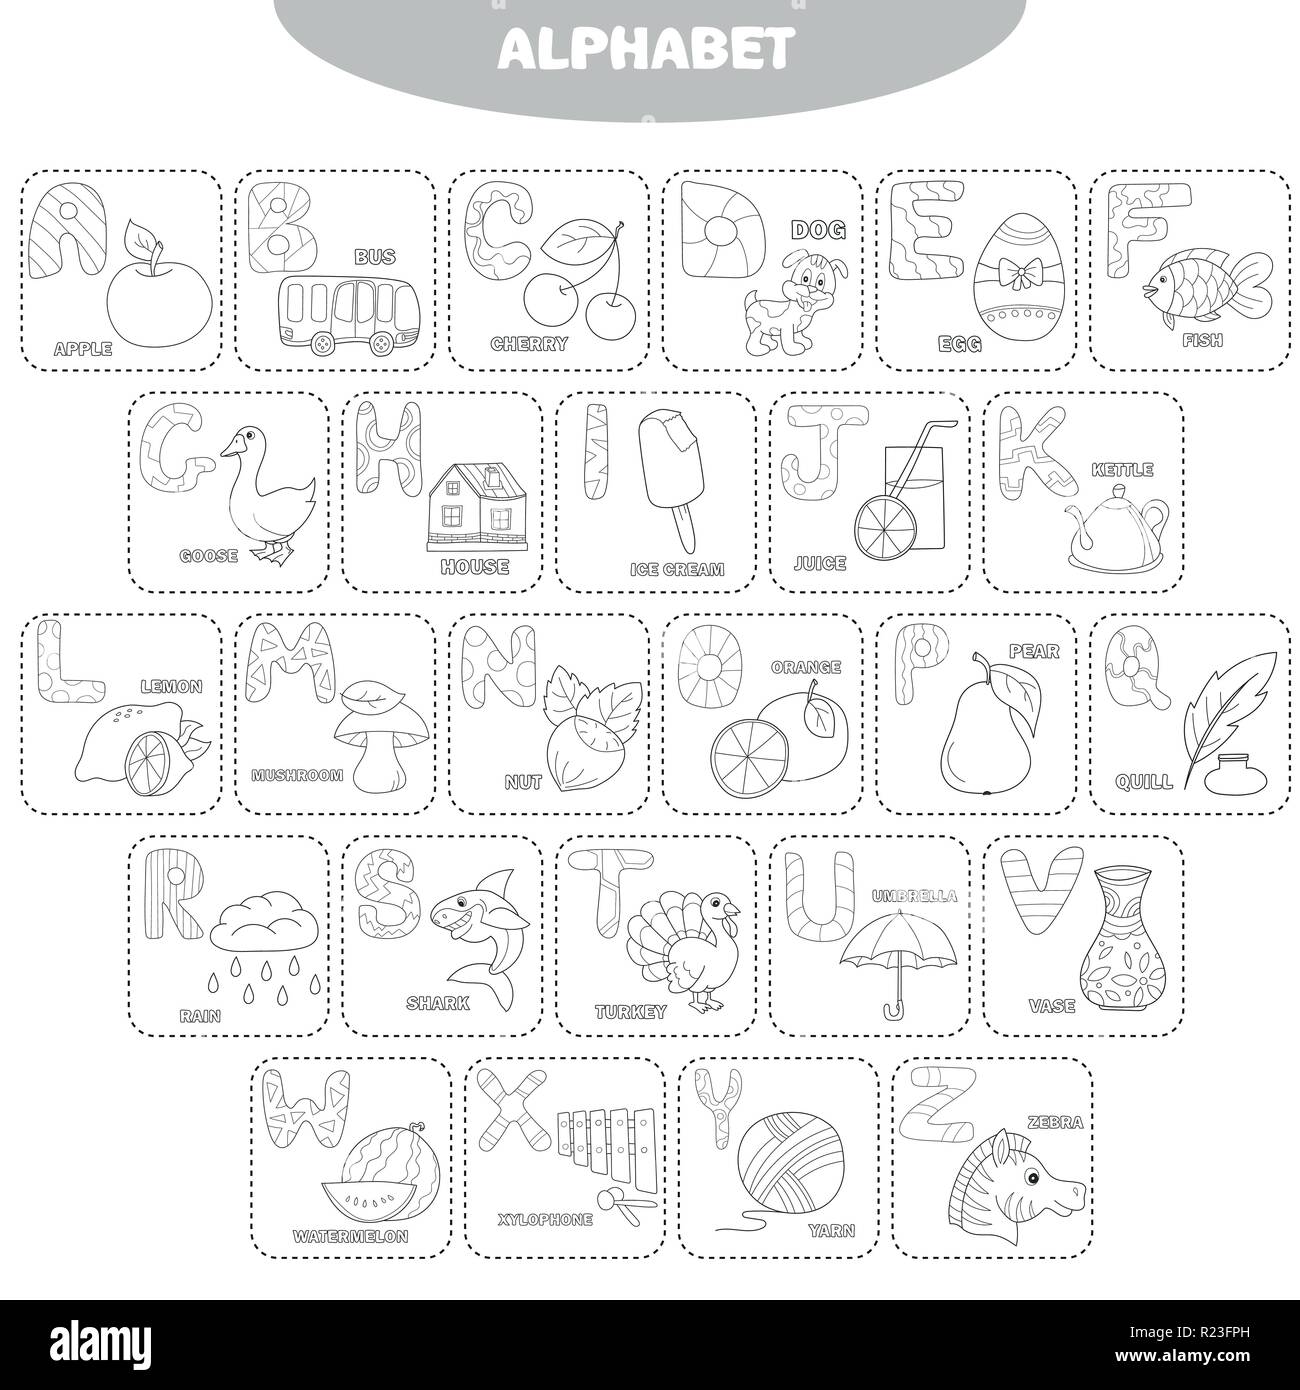 Coloring page english alphabet with pictures and titles for children education stock vector image art